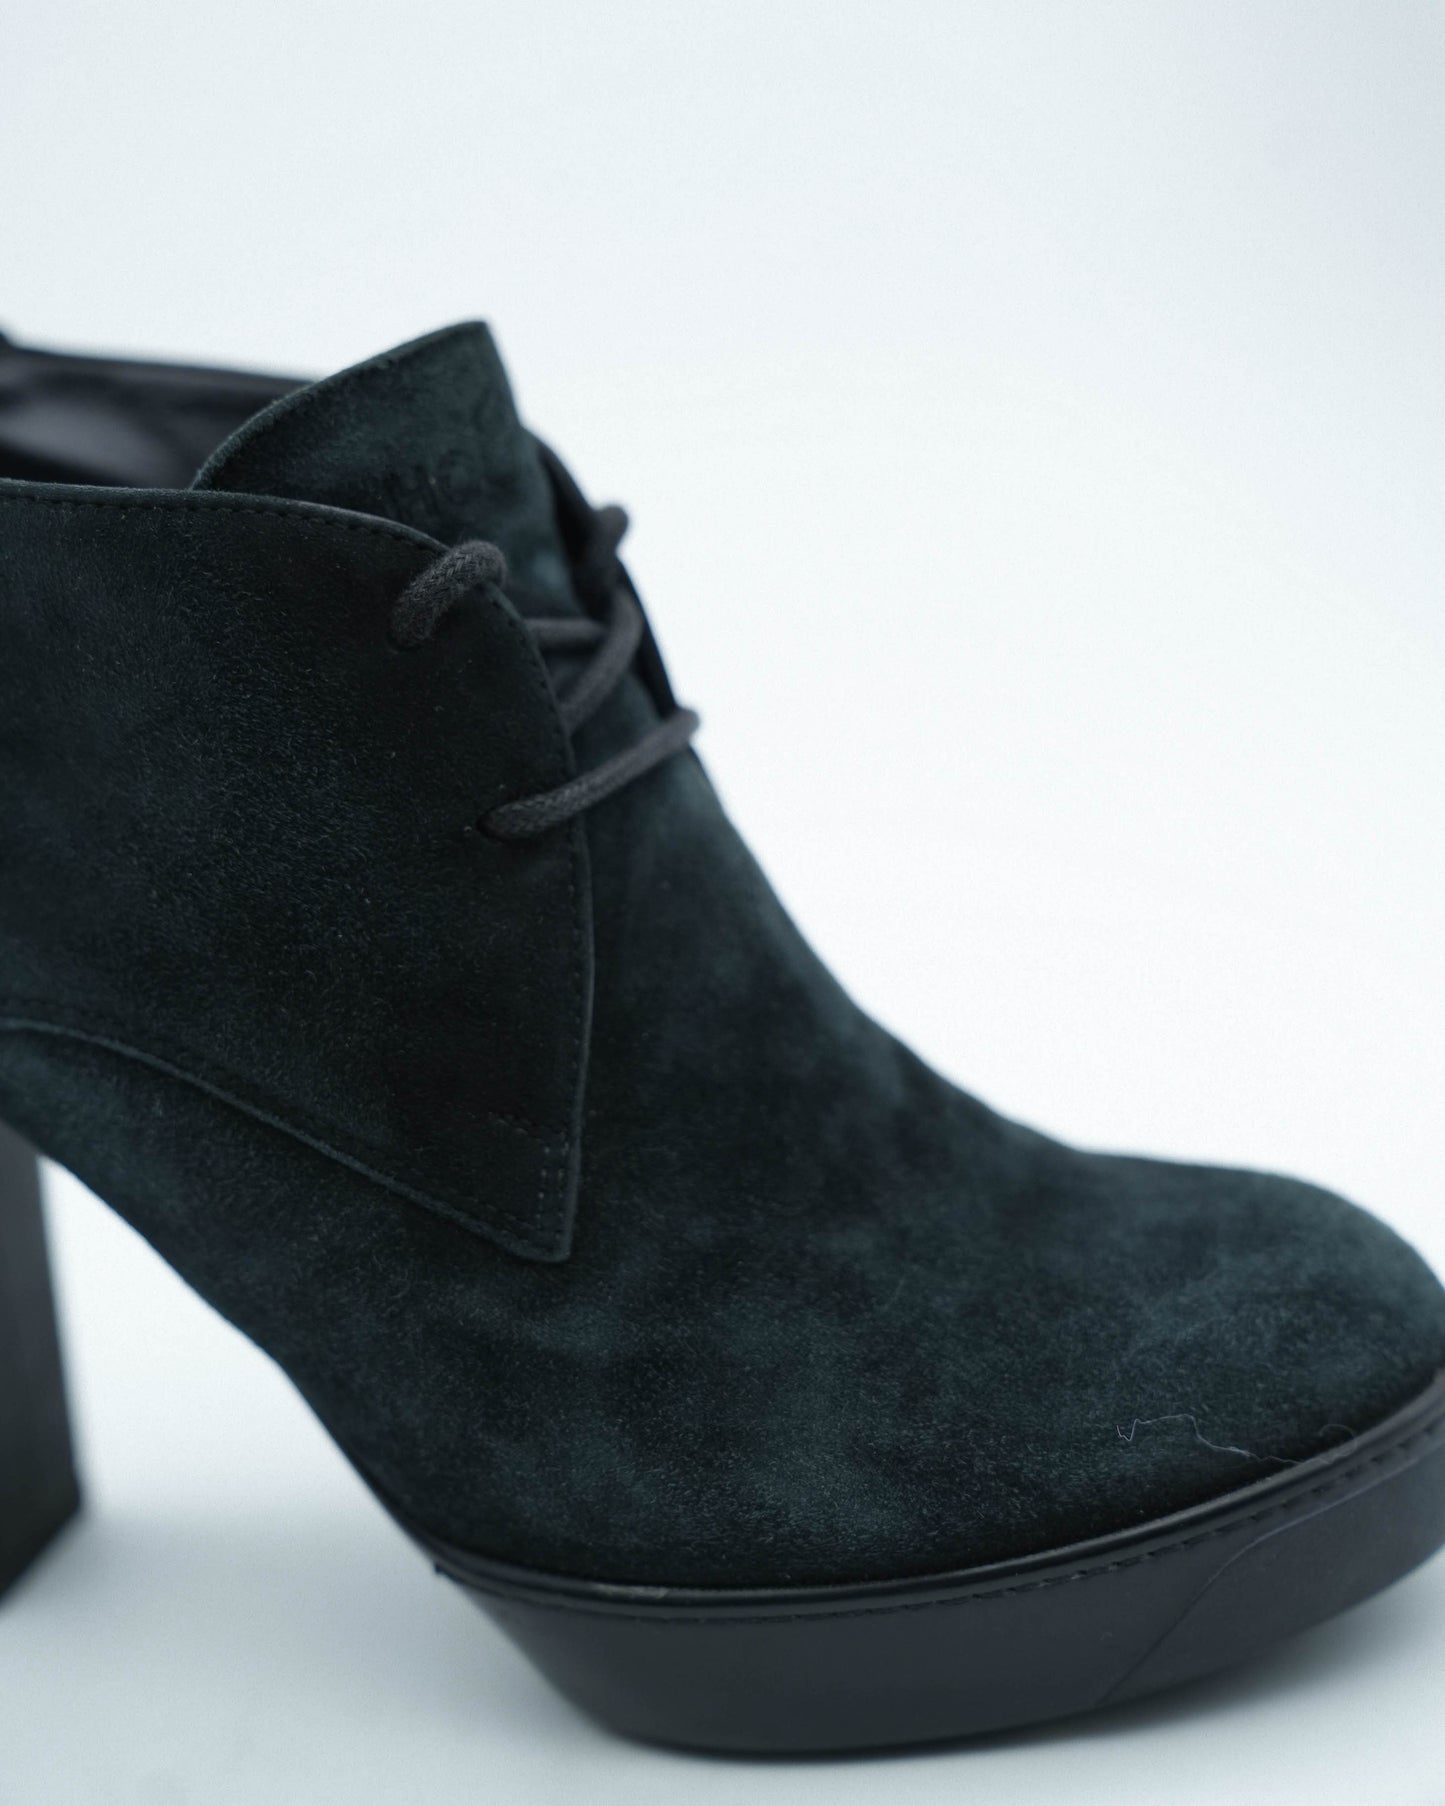 Ankle Boots